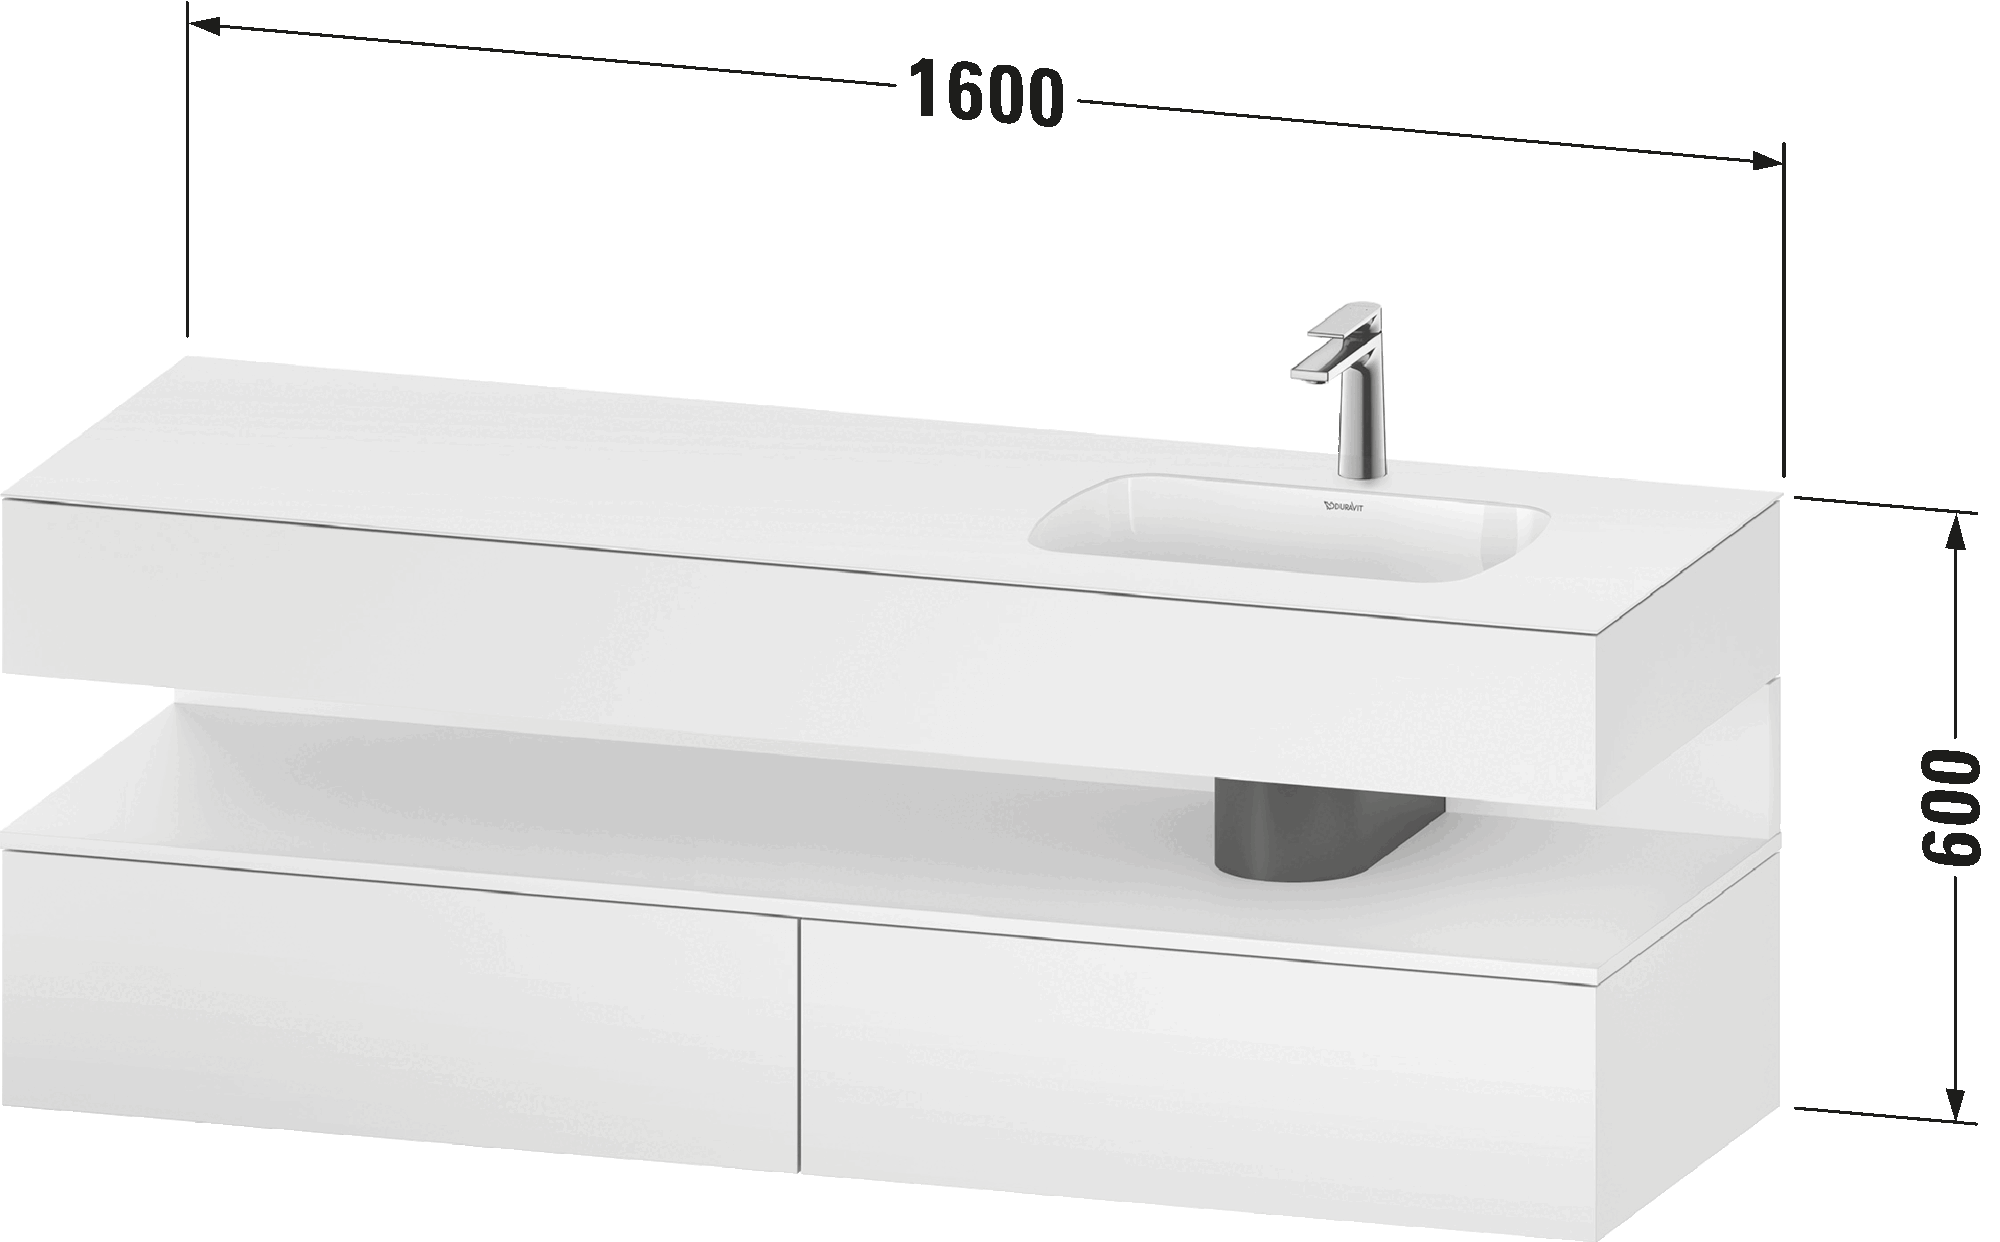 Built-in basin with console vanity unit, QA4796